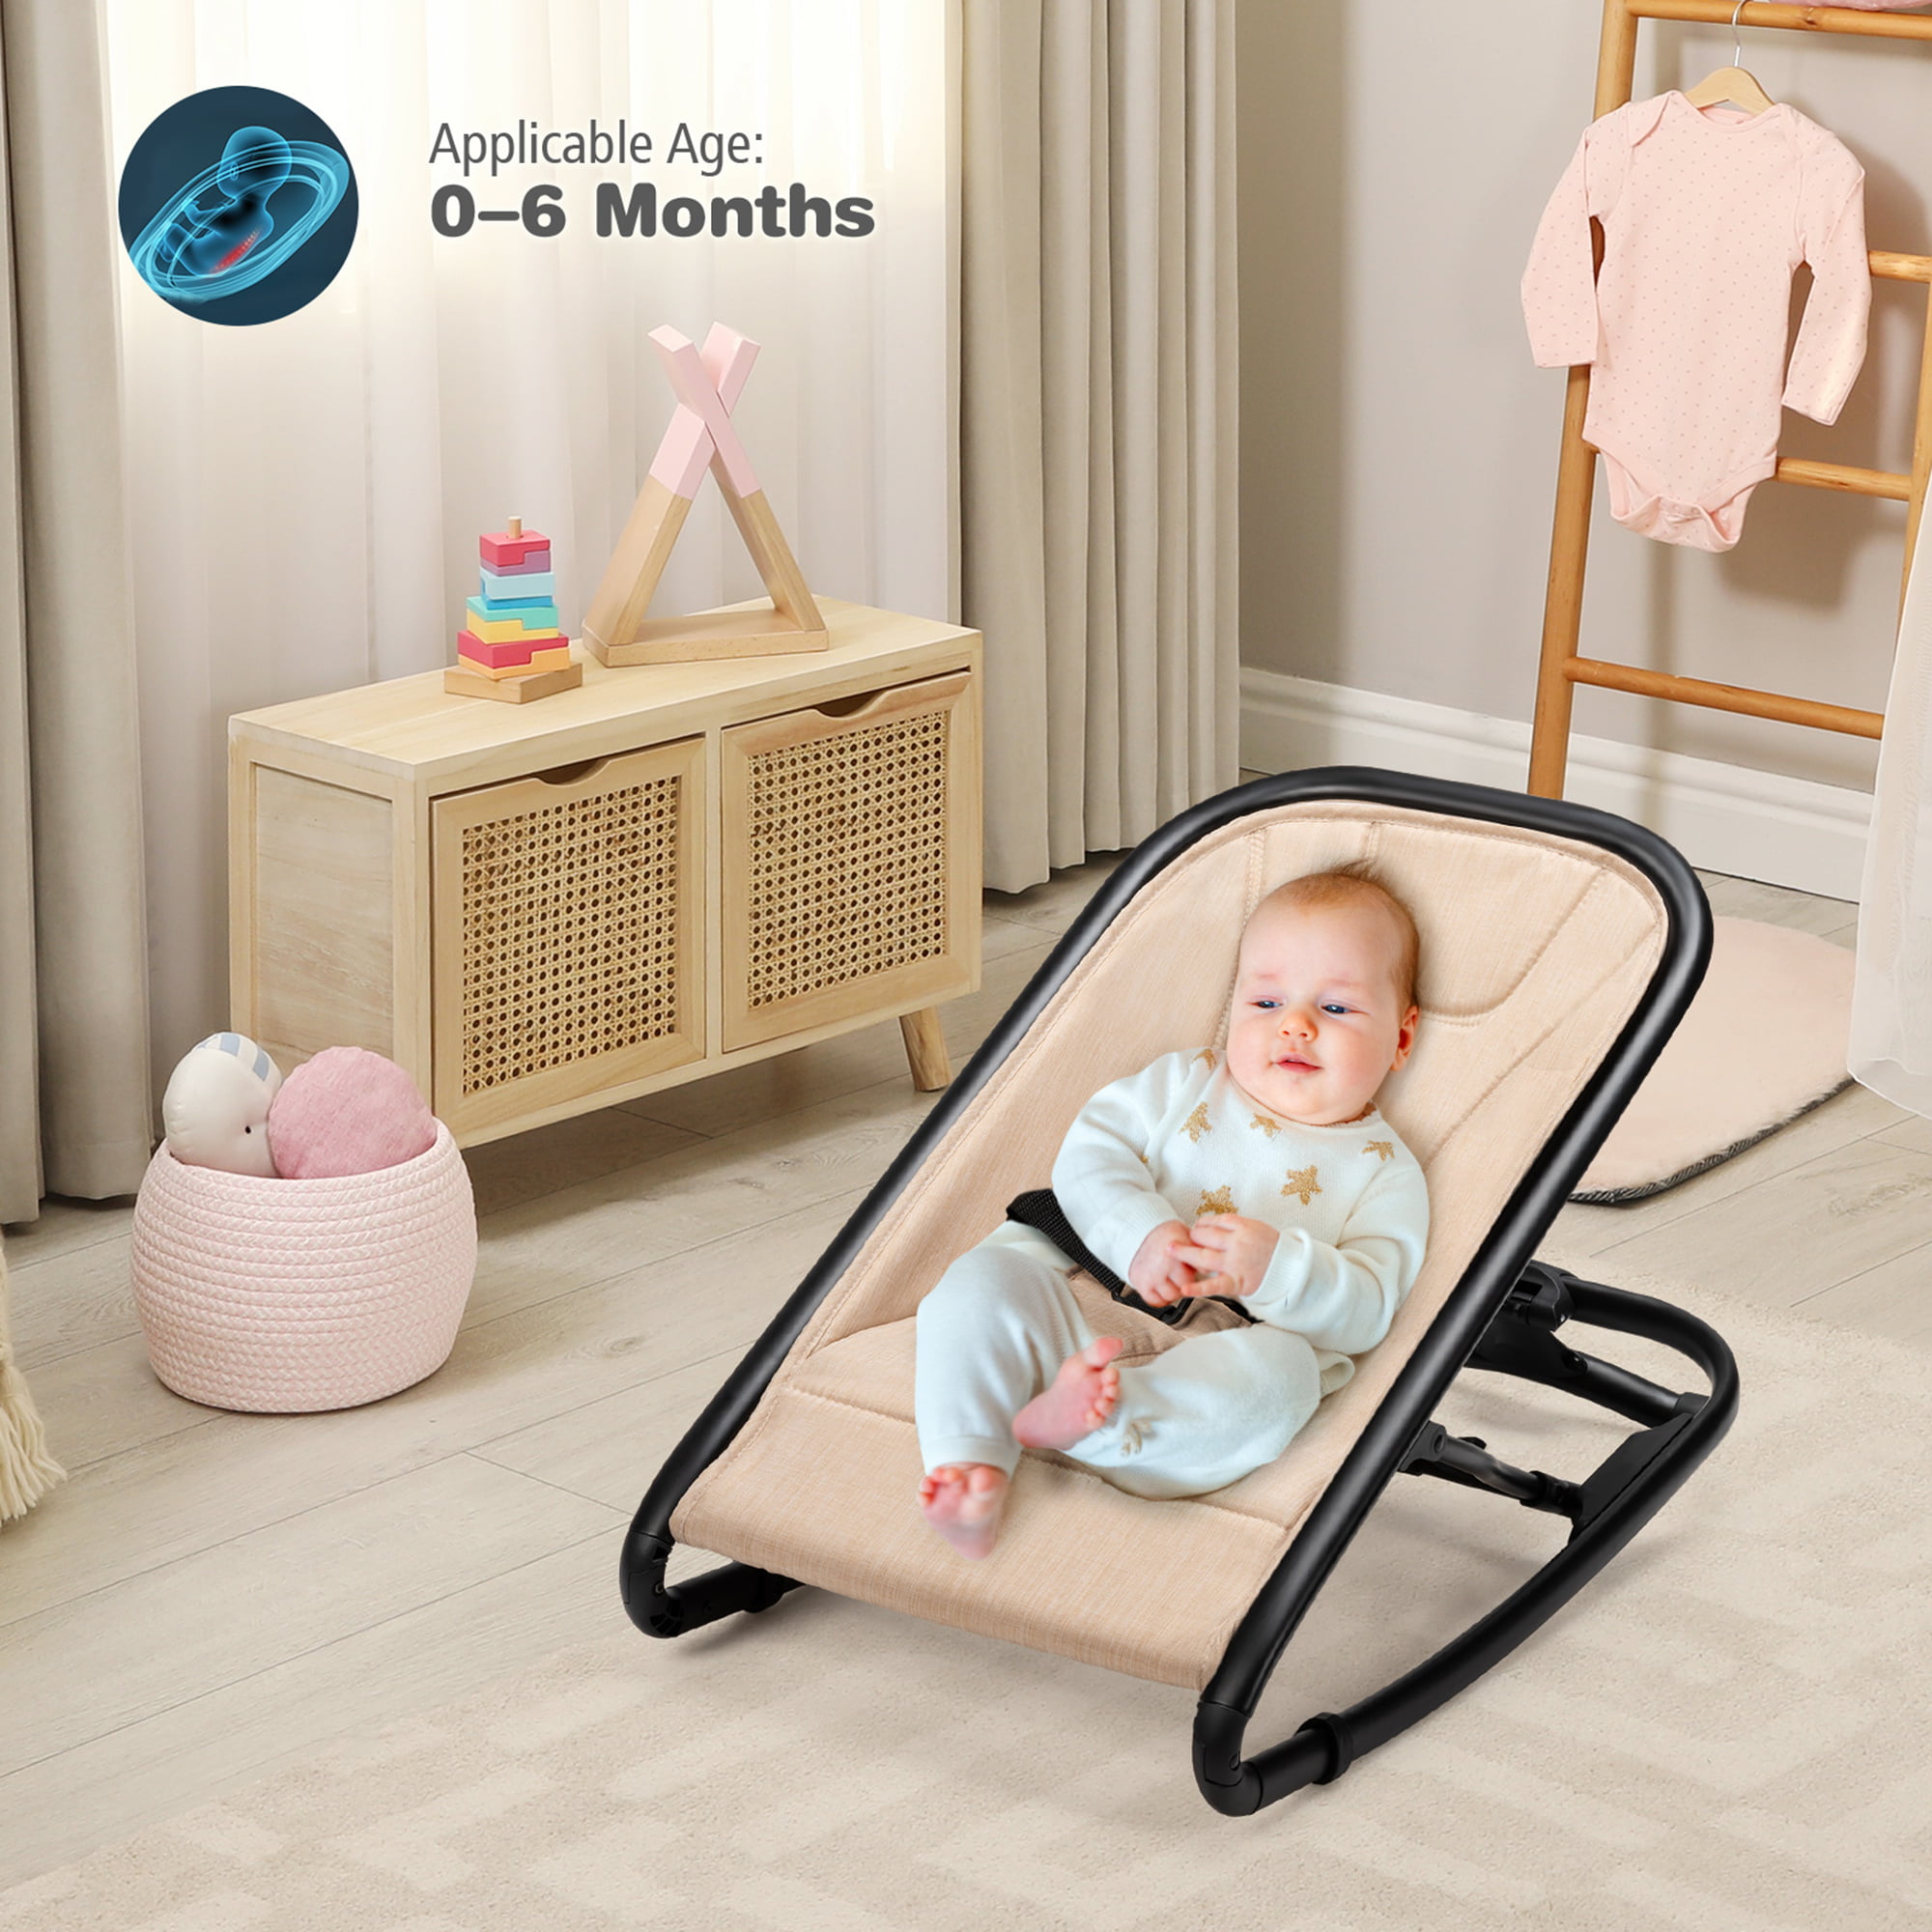 BABY JOY 2 in 1 Baby Rocker Portable Baby Bouncer Seat w/ 2 Adjustable Recline Positions Beige Folding Infant Bouncer Seat w/ 2 Modes of Use for Newborn Babies 33 LBS Weight Capacity 